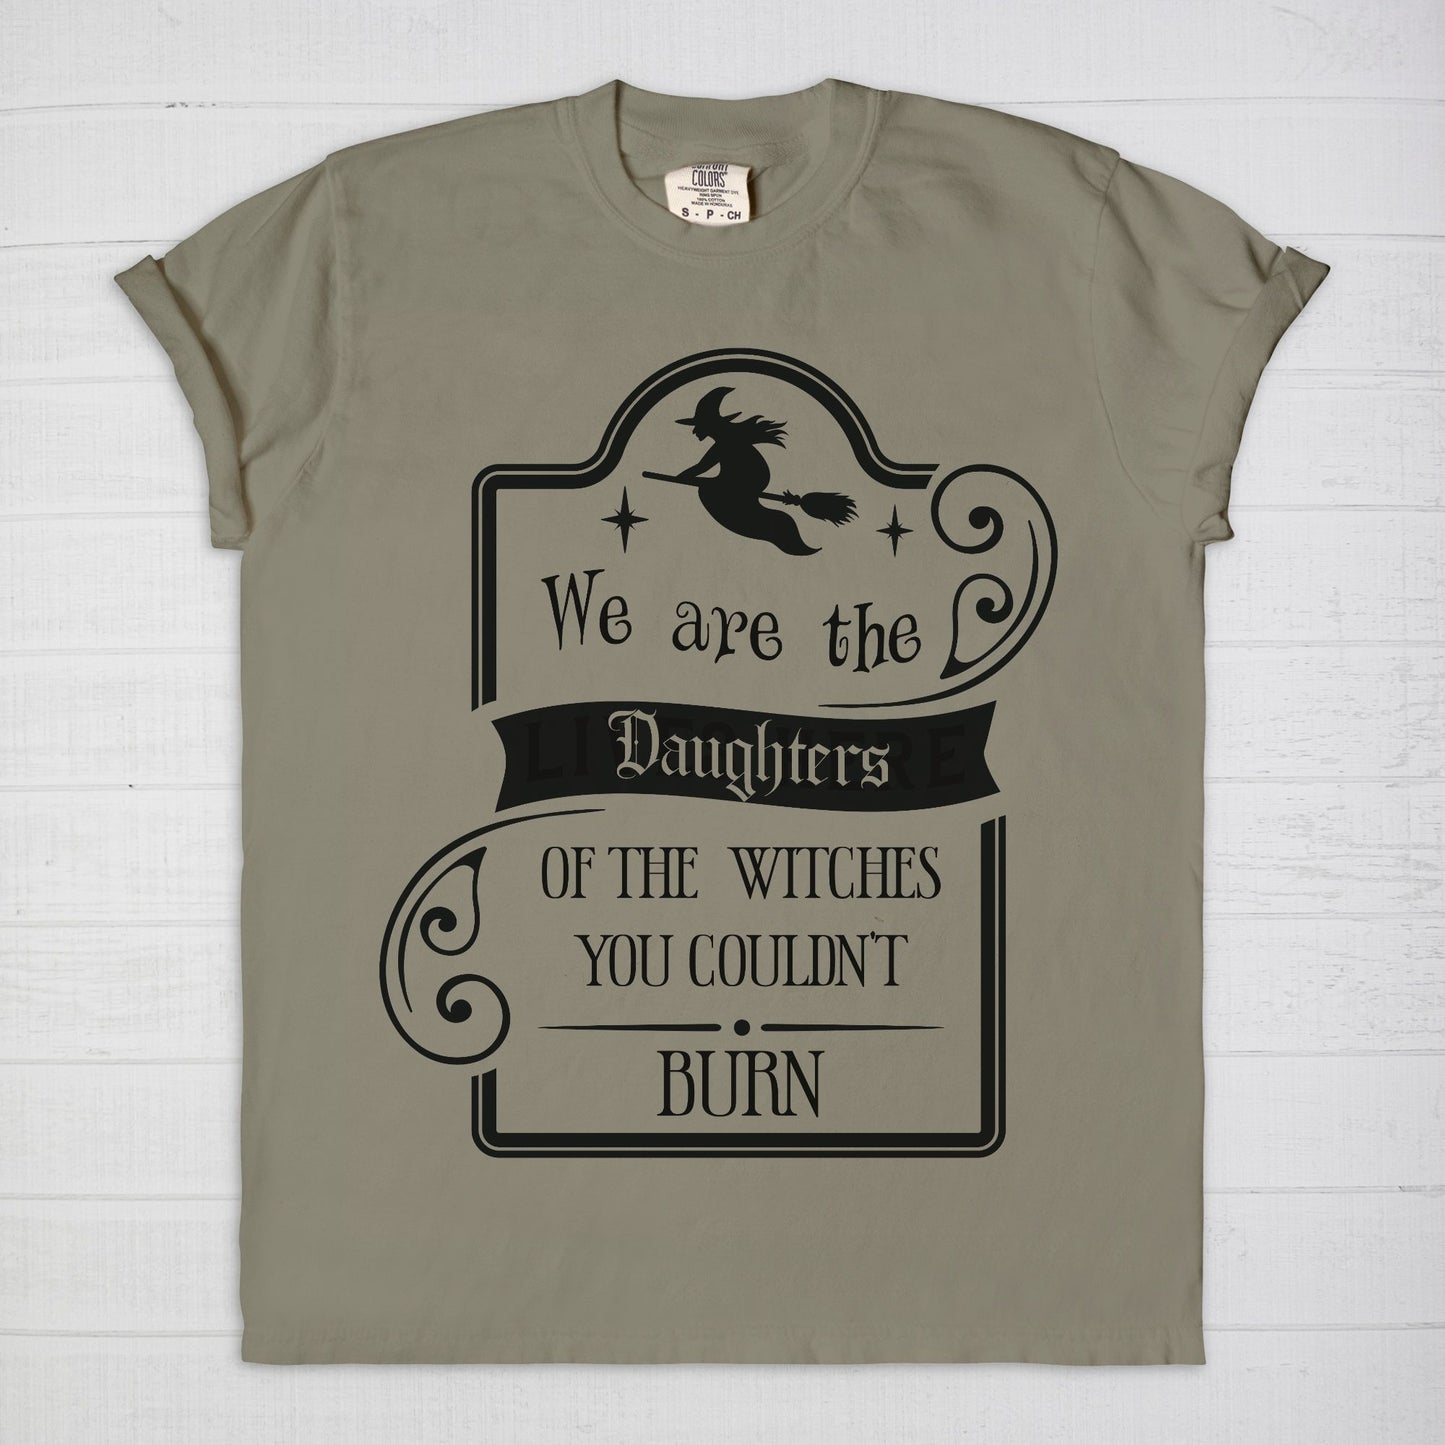 We are the daughters of the Witches you Couldn't Burn tee shirt. Sorcery Soap + Hocus Pocus Crafts